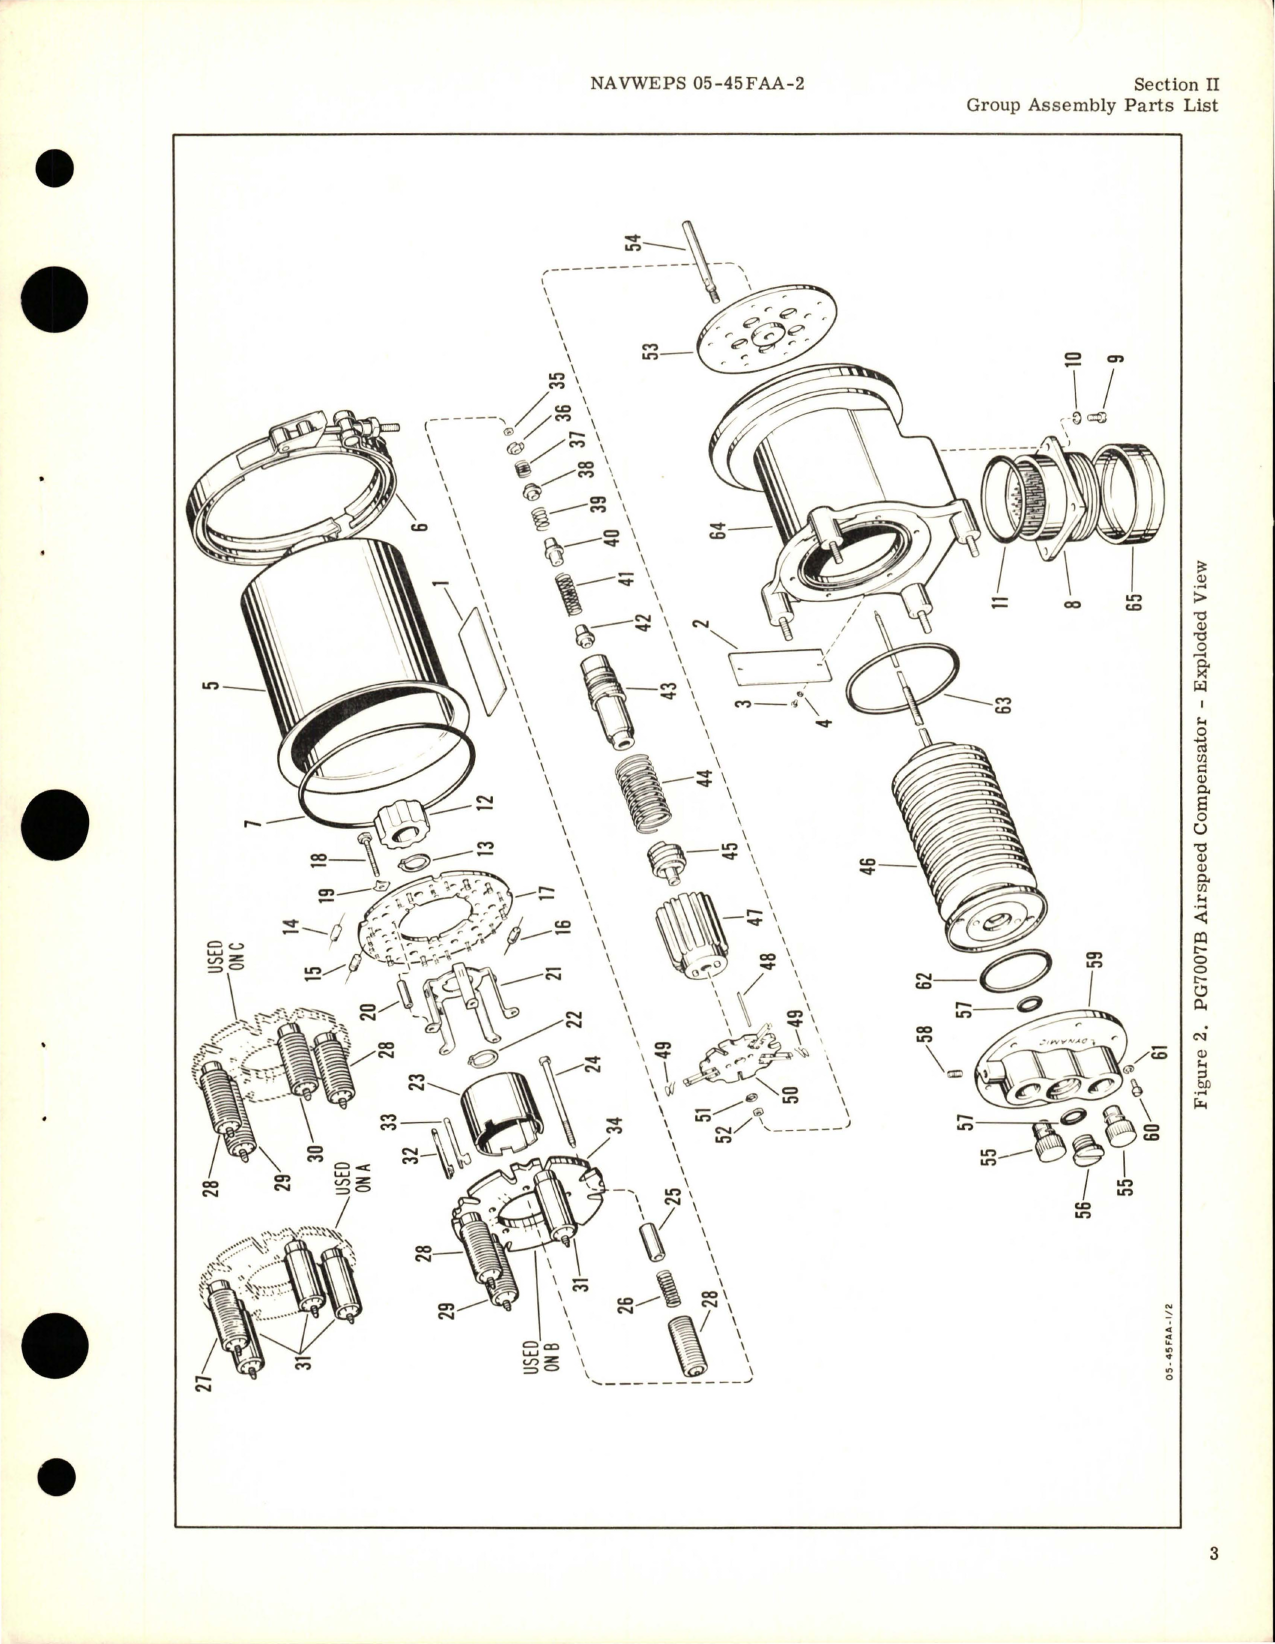 Sample page 5 from AirCorps Library document: Illustrated Parts Breakdown for Airspeed Compensator - PG7007B20, PG7007B23, and PG7007B24